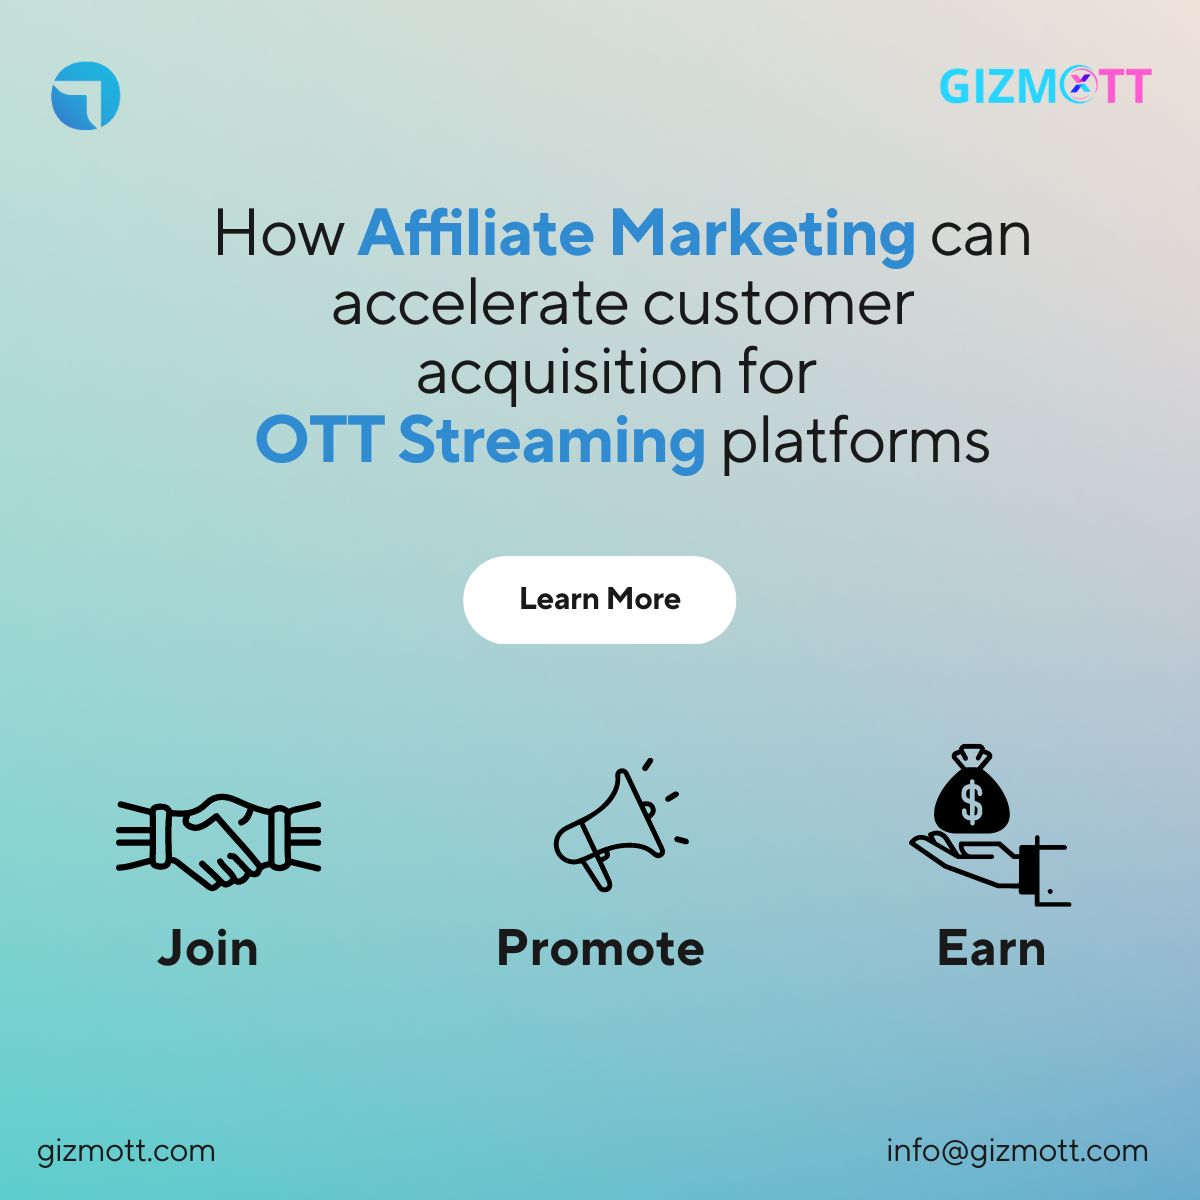 How Affiliate Marketing can accelerate customer acquisition for OTT Streaming Platforms